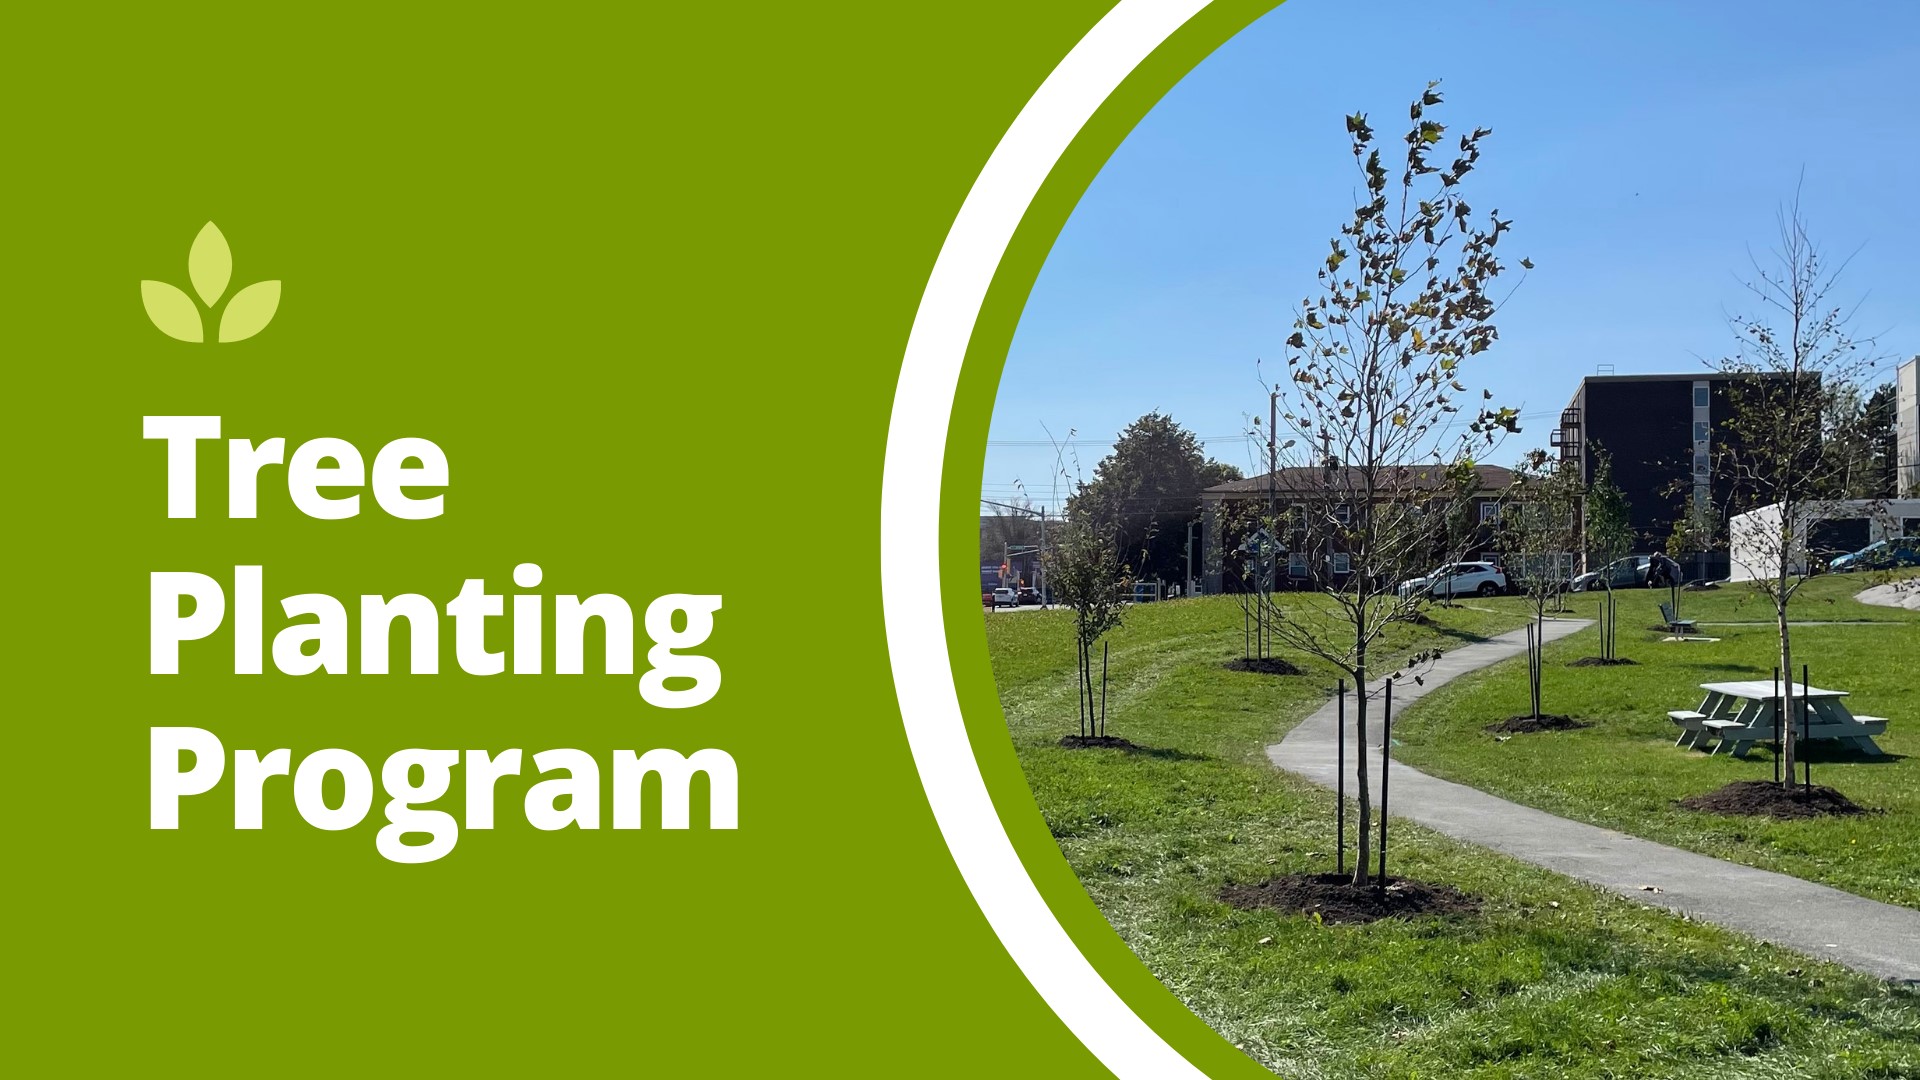 the words "tree planting program" next to an image of a pathway with new trees planted